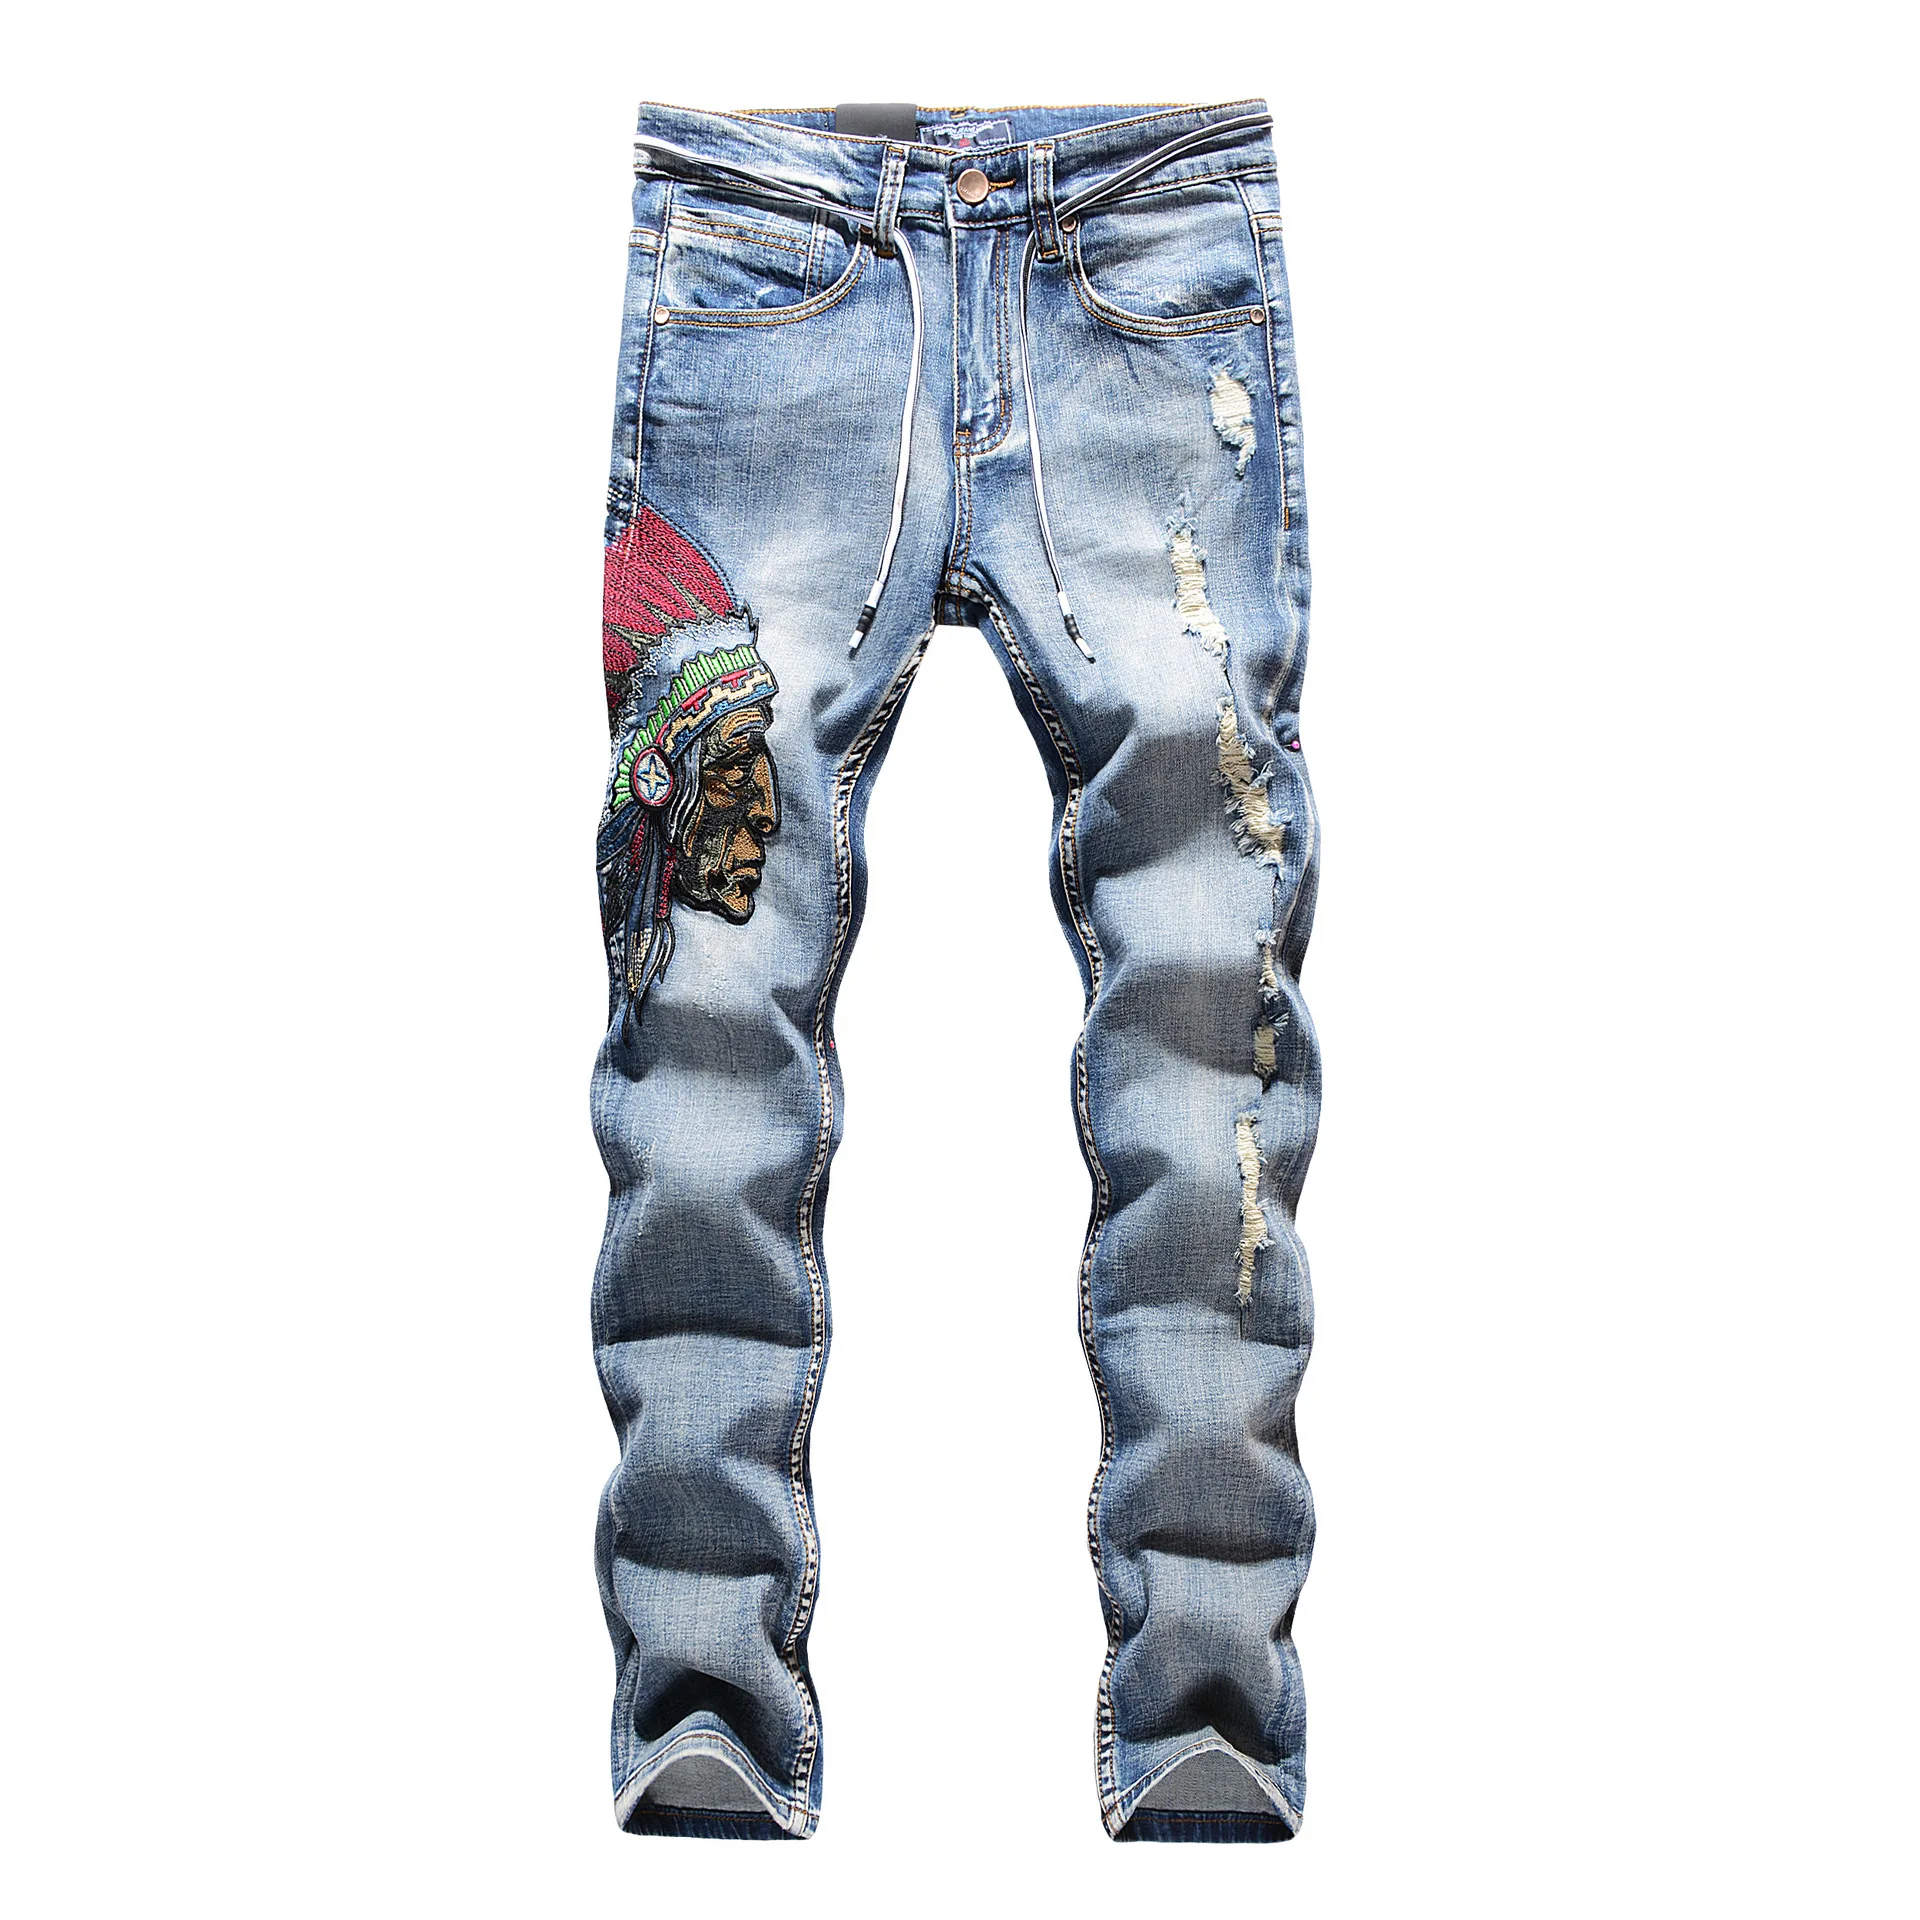 Magistraat mug Meditatief Online Shop Fast Delivery Denim Plus Size Men's Ripped Skinny Jeans For Men  Stylish - Buy Trousers Camouflage Ripped Skinny Jeans,Ripped Skinny Jeans,Men  Skinny Jeans 2022 Designer Jeans For Men Stylish Product